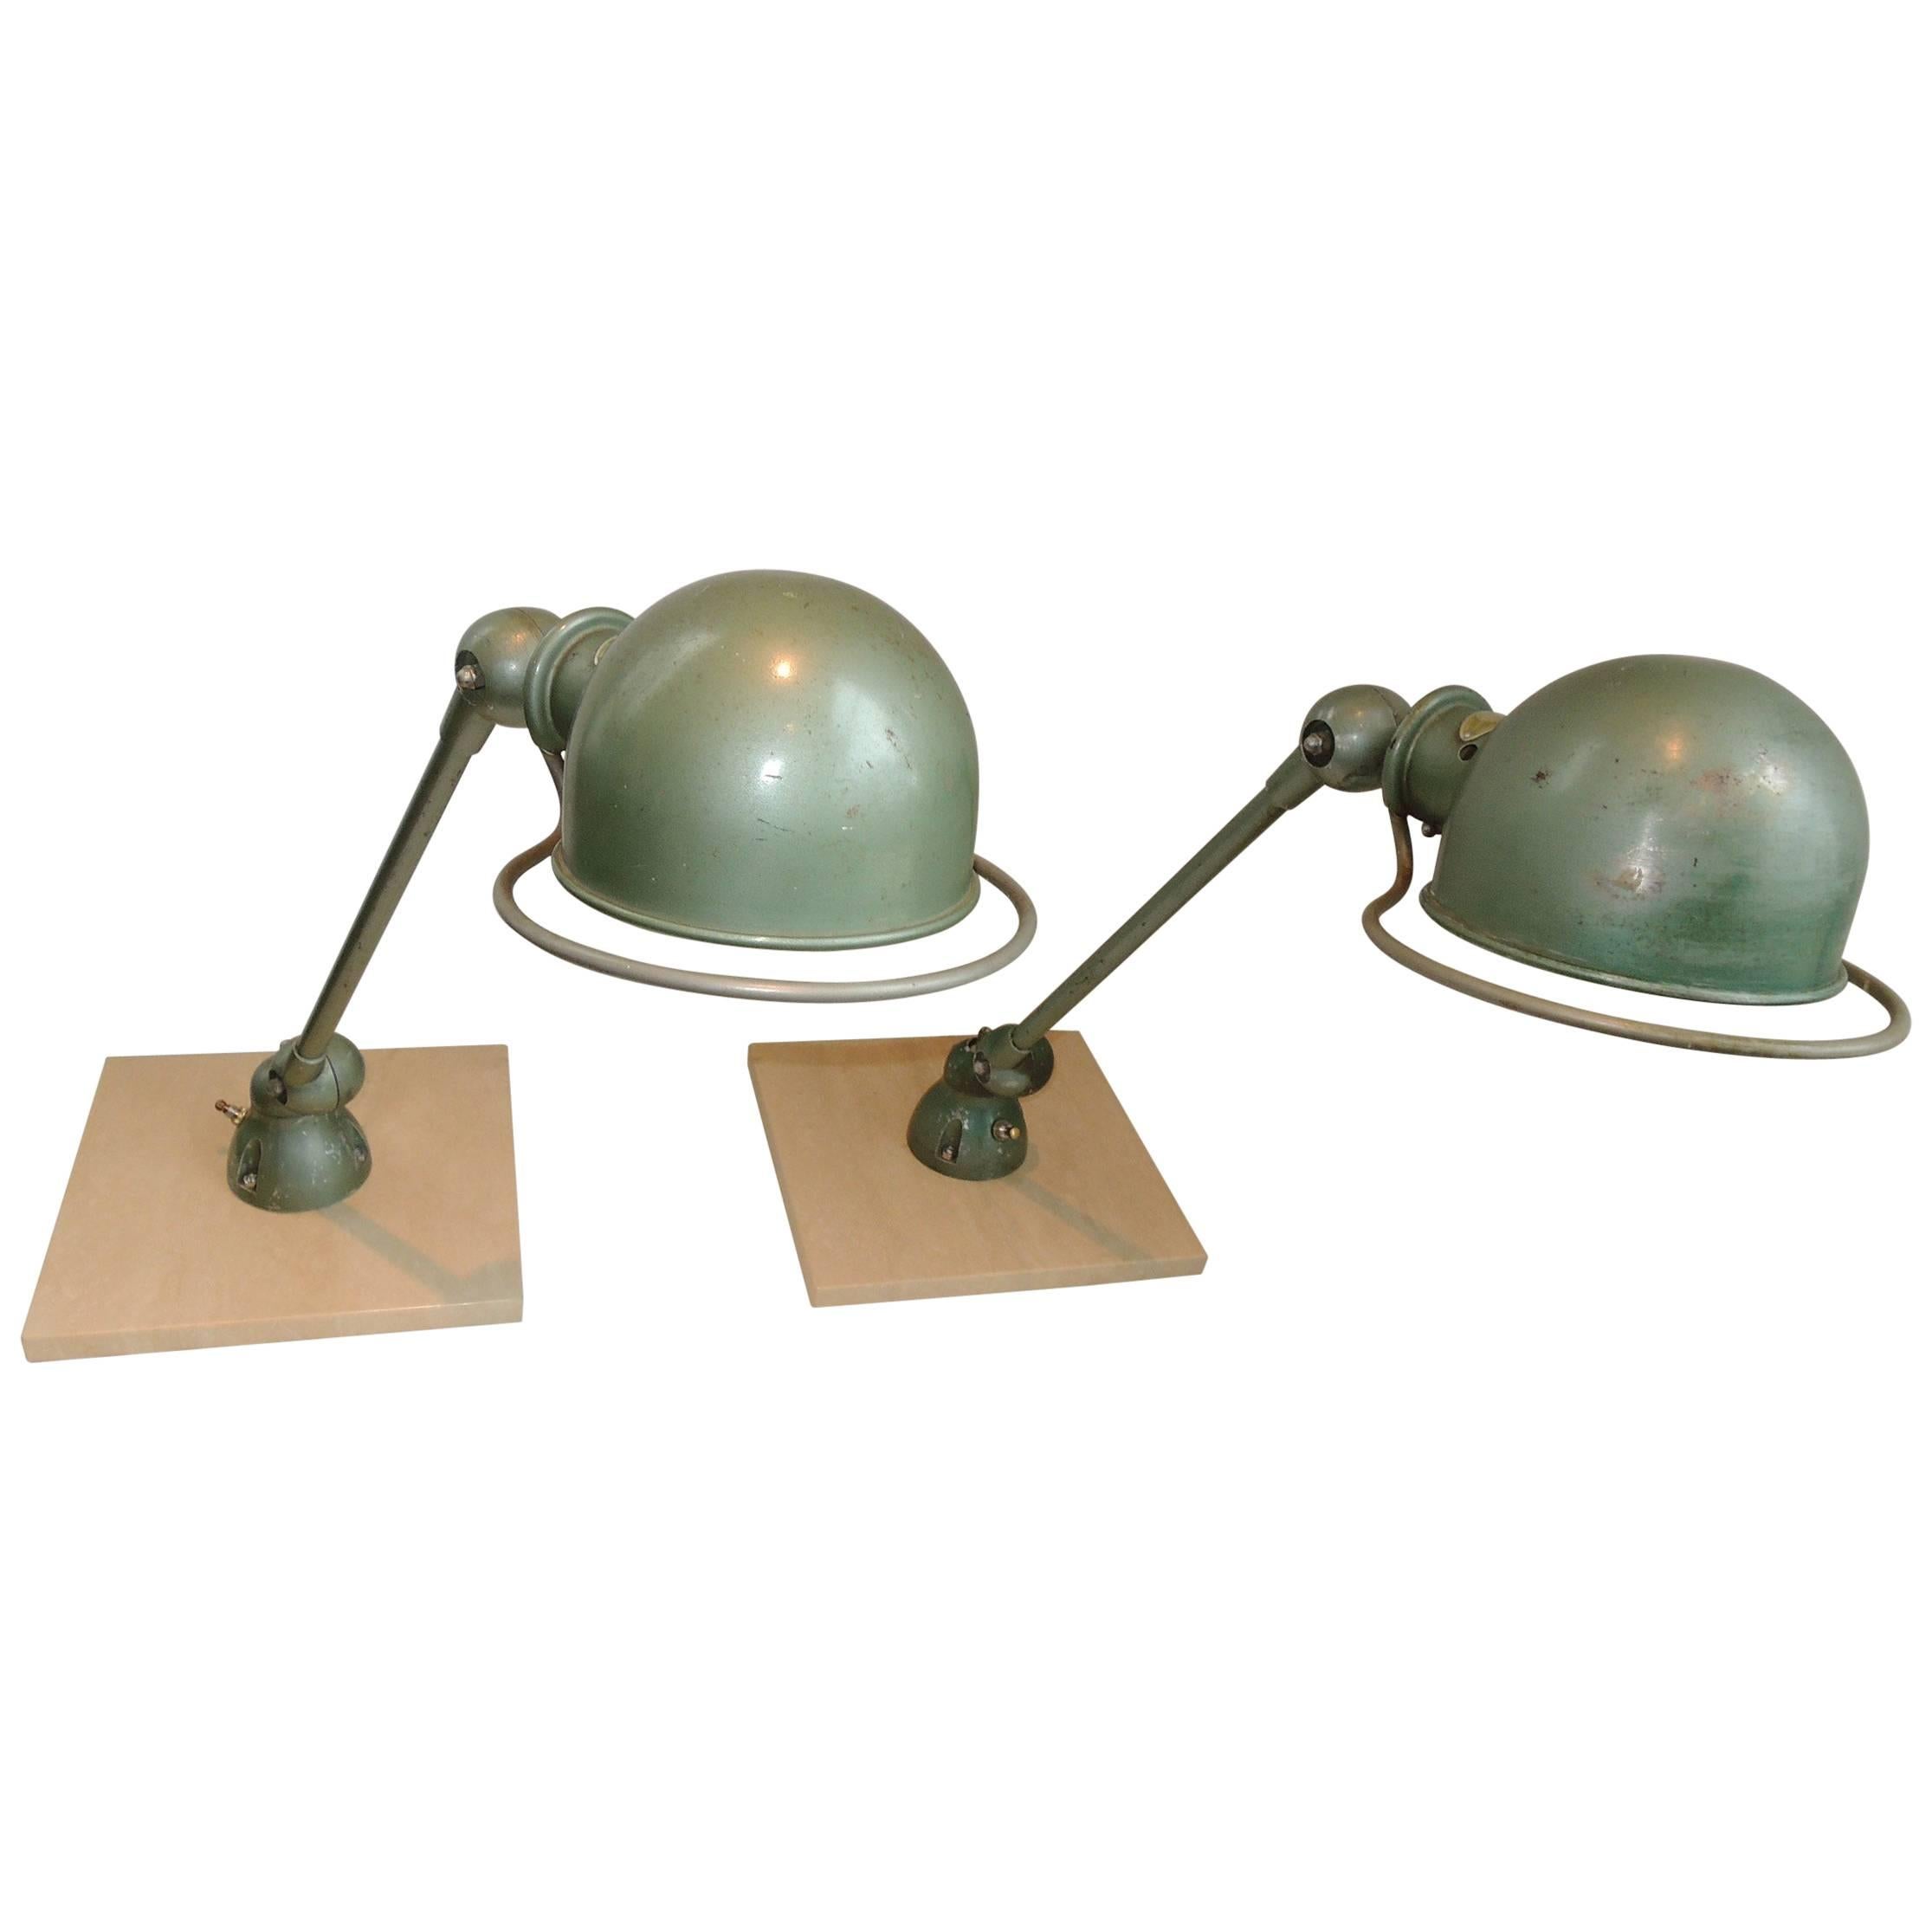 One-arm articulated industrial lamps designed by Jean-Louis Domecq, manufactured by Jeldé post WWII.
Strong, sturdy, highly functional. Originally meant to be screwed into a work table. Ours are rewired and mounted on travertine bases, 11